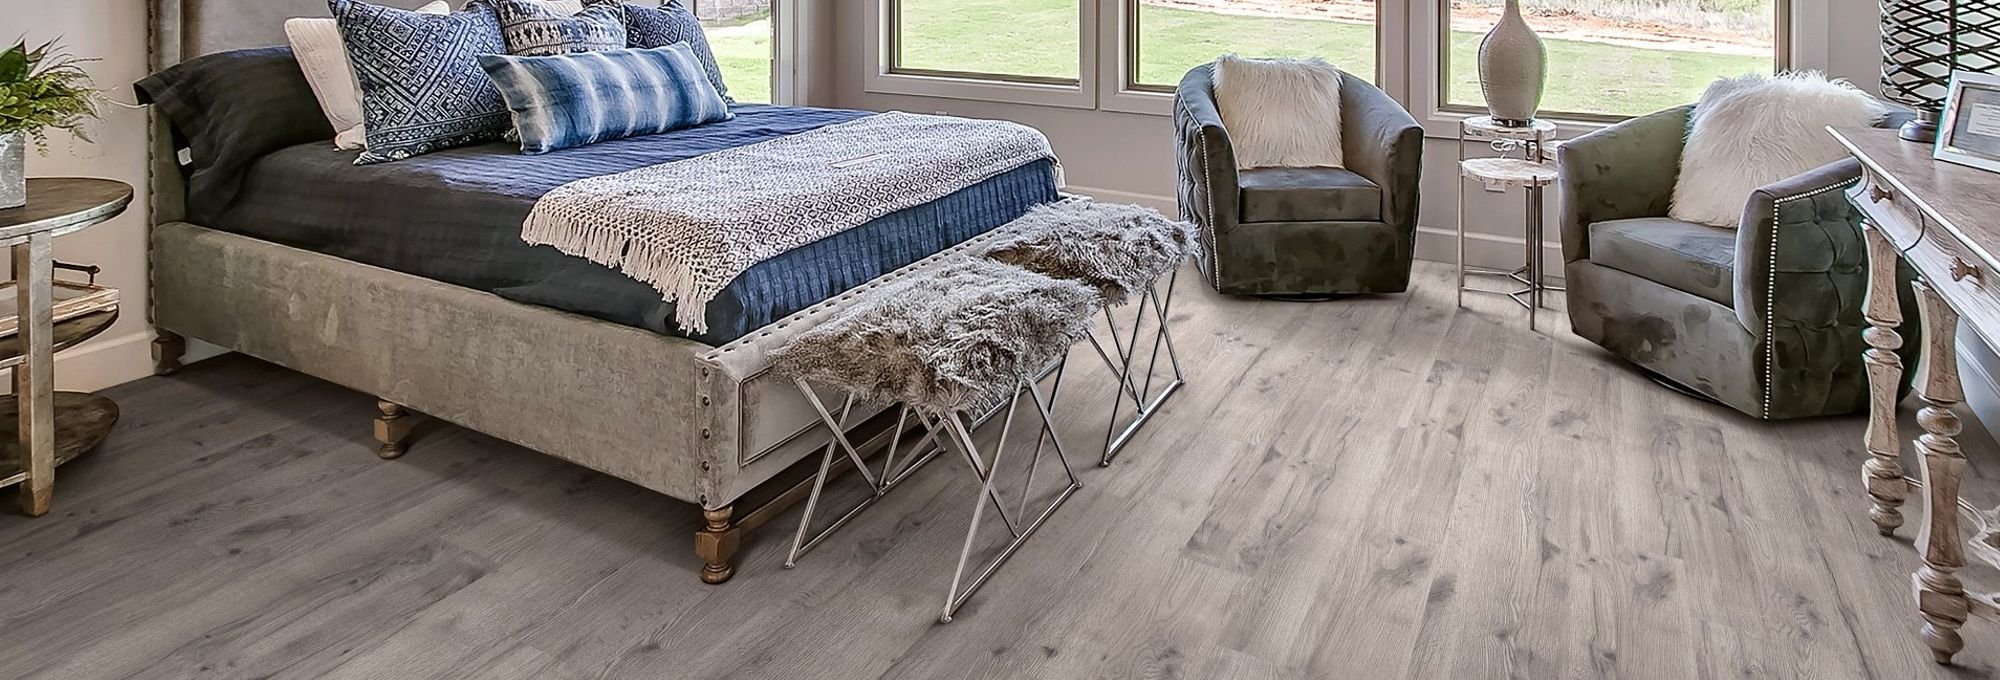 Bedroom with wood-look laminate flooring from Korfhage Floor Covering in the Louisville, KY area